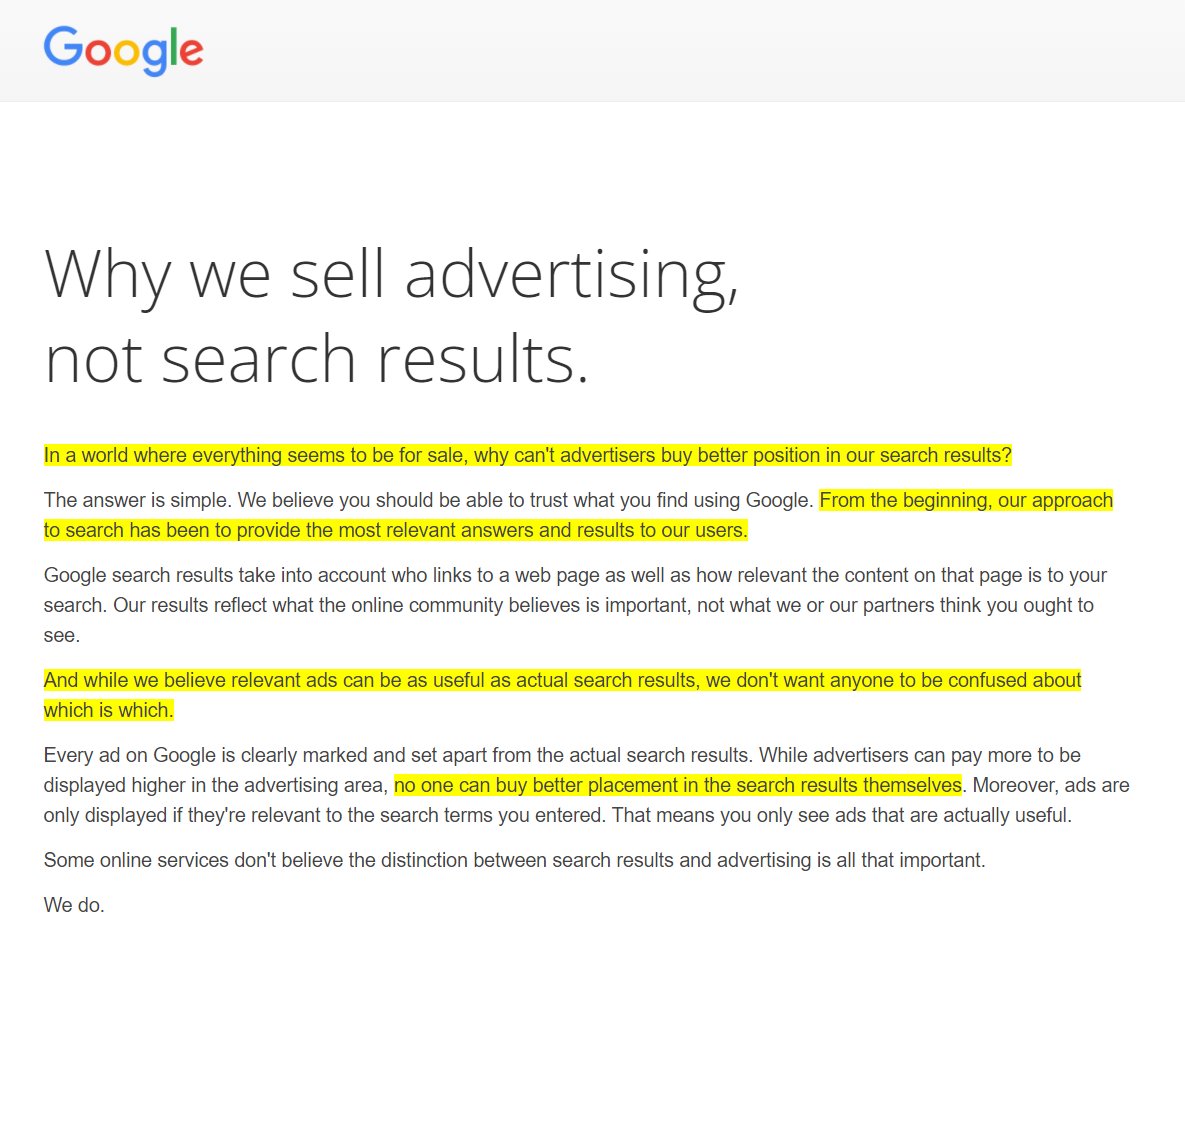 Adrian Krebs Wow This Is Gold The Post Critiques The Practice Of Displaying Ads Above Search Results A Method Used By Some Of Google S Competitors Back Then At The Time